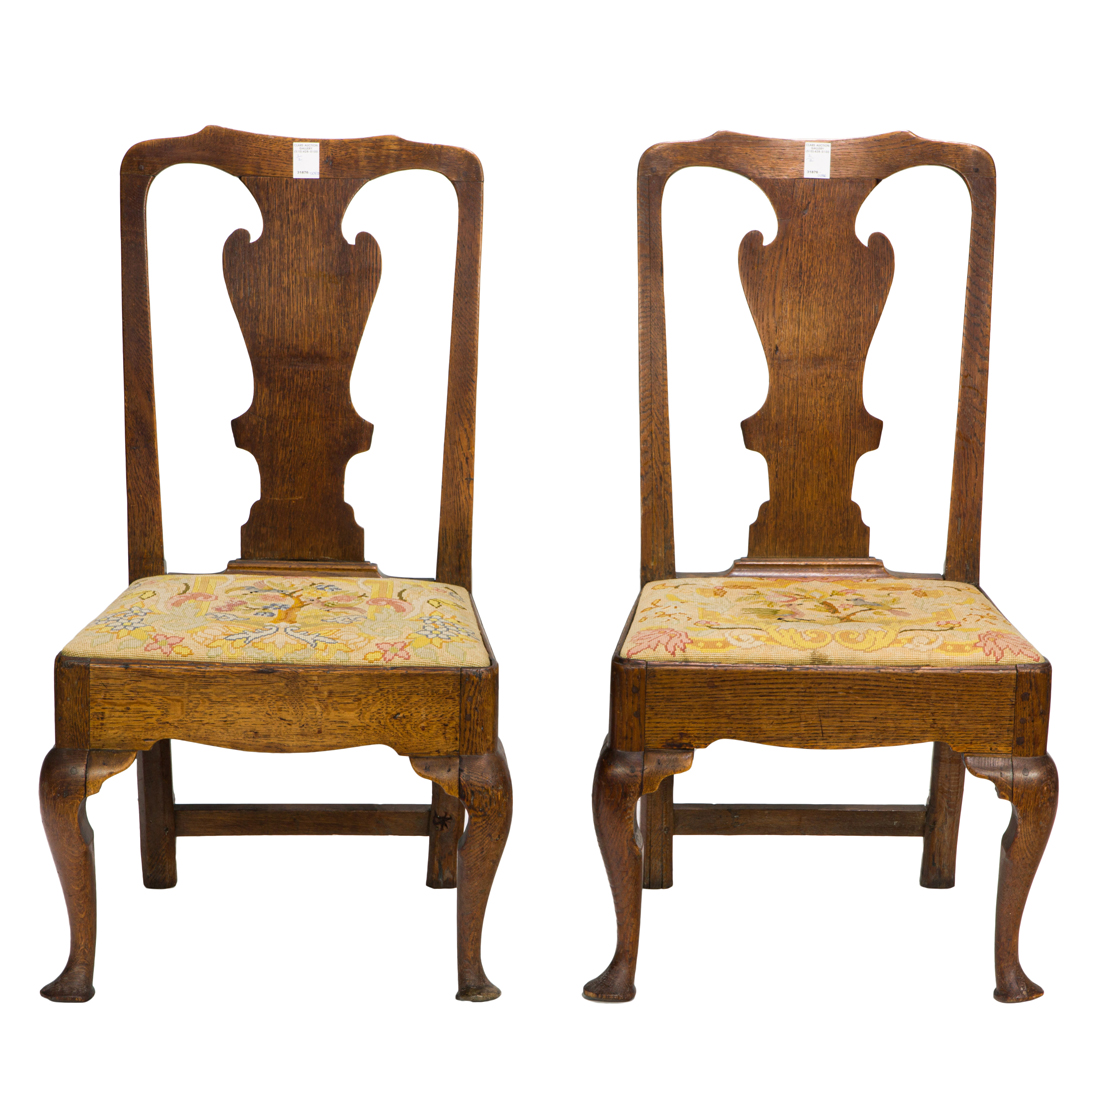 A PAIR OF GEORGE III STYLE SIDE